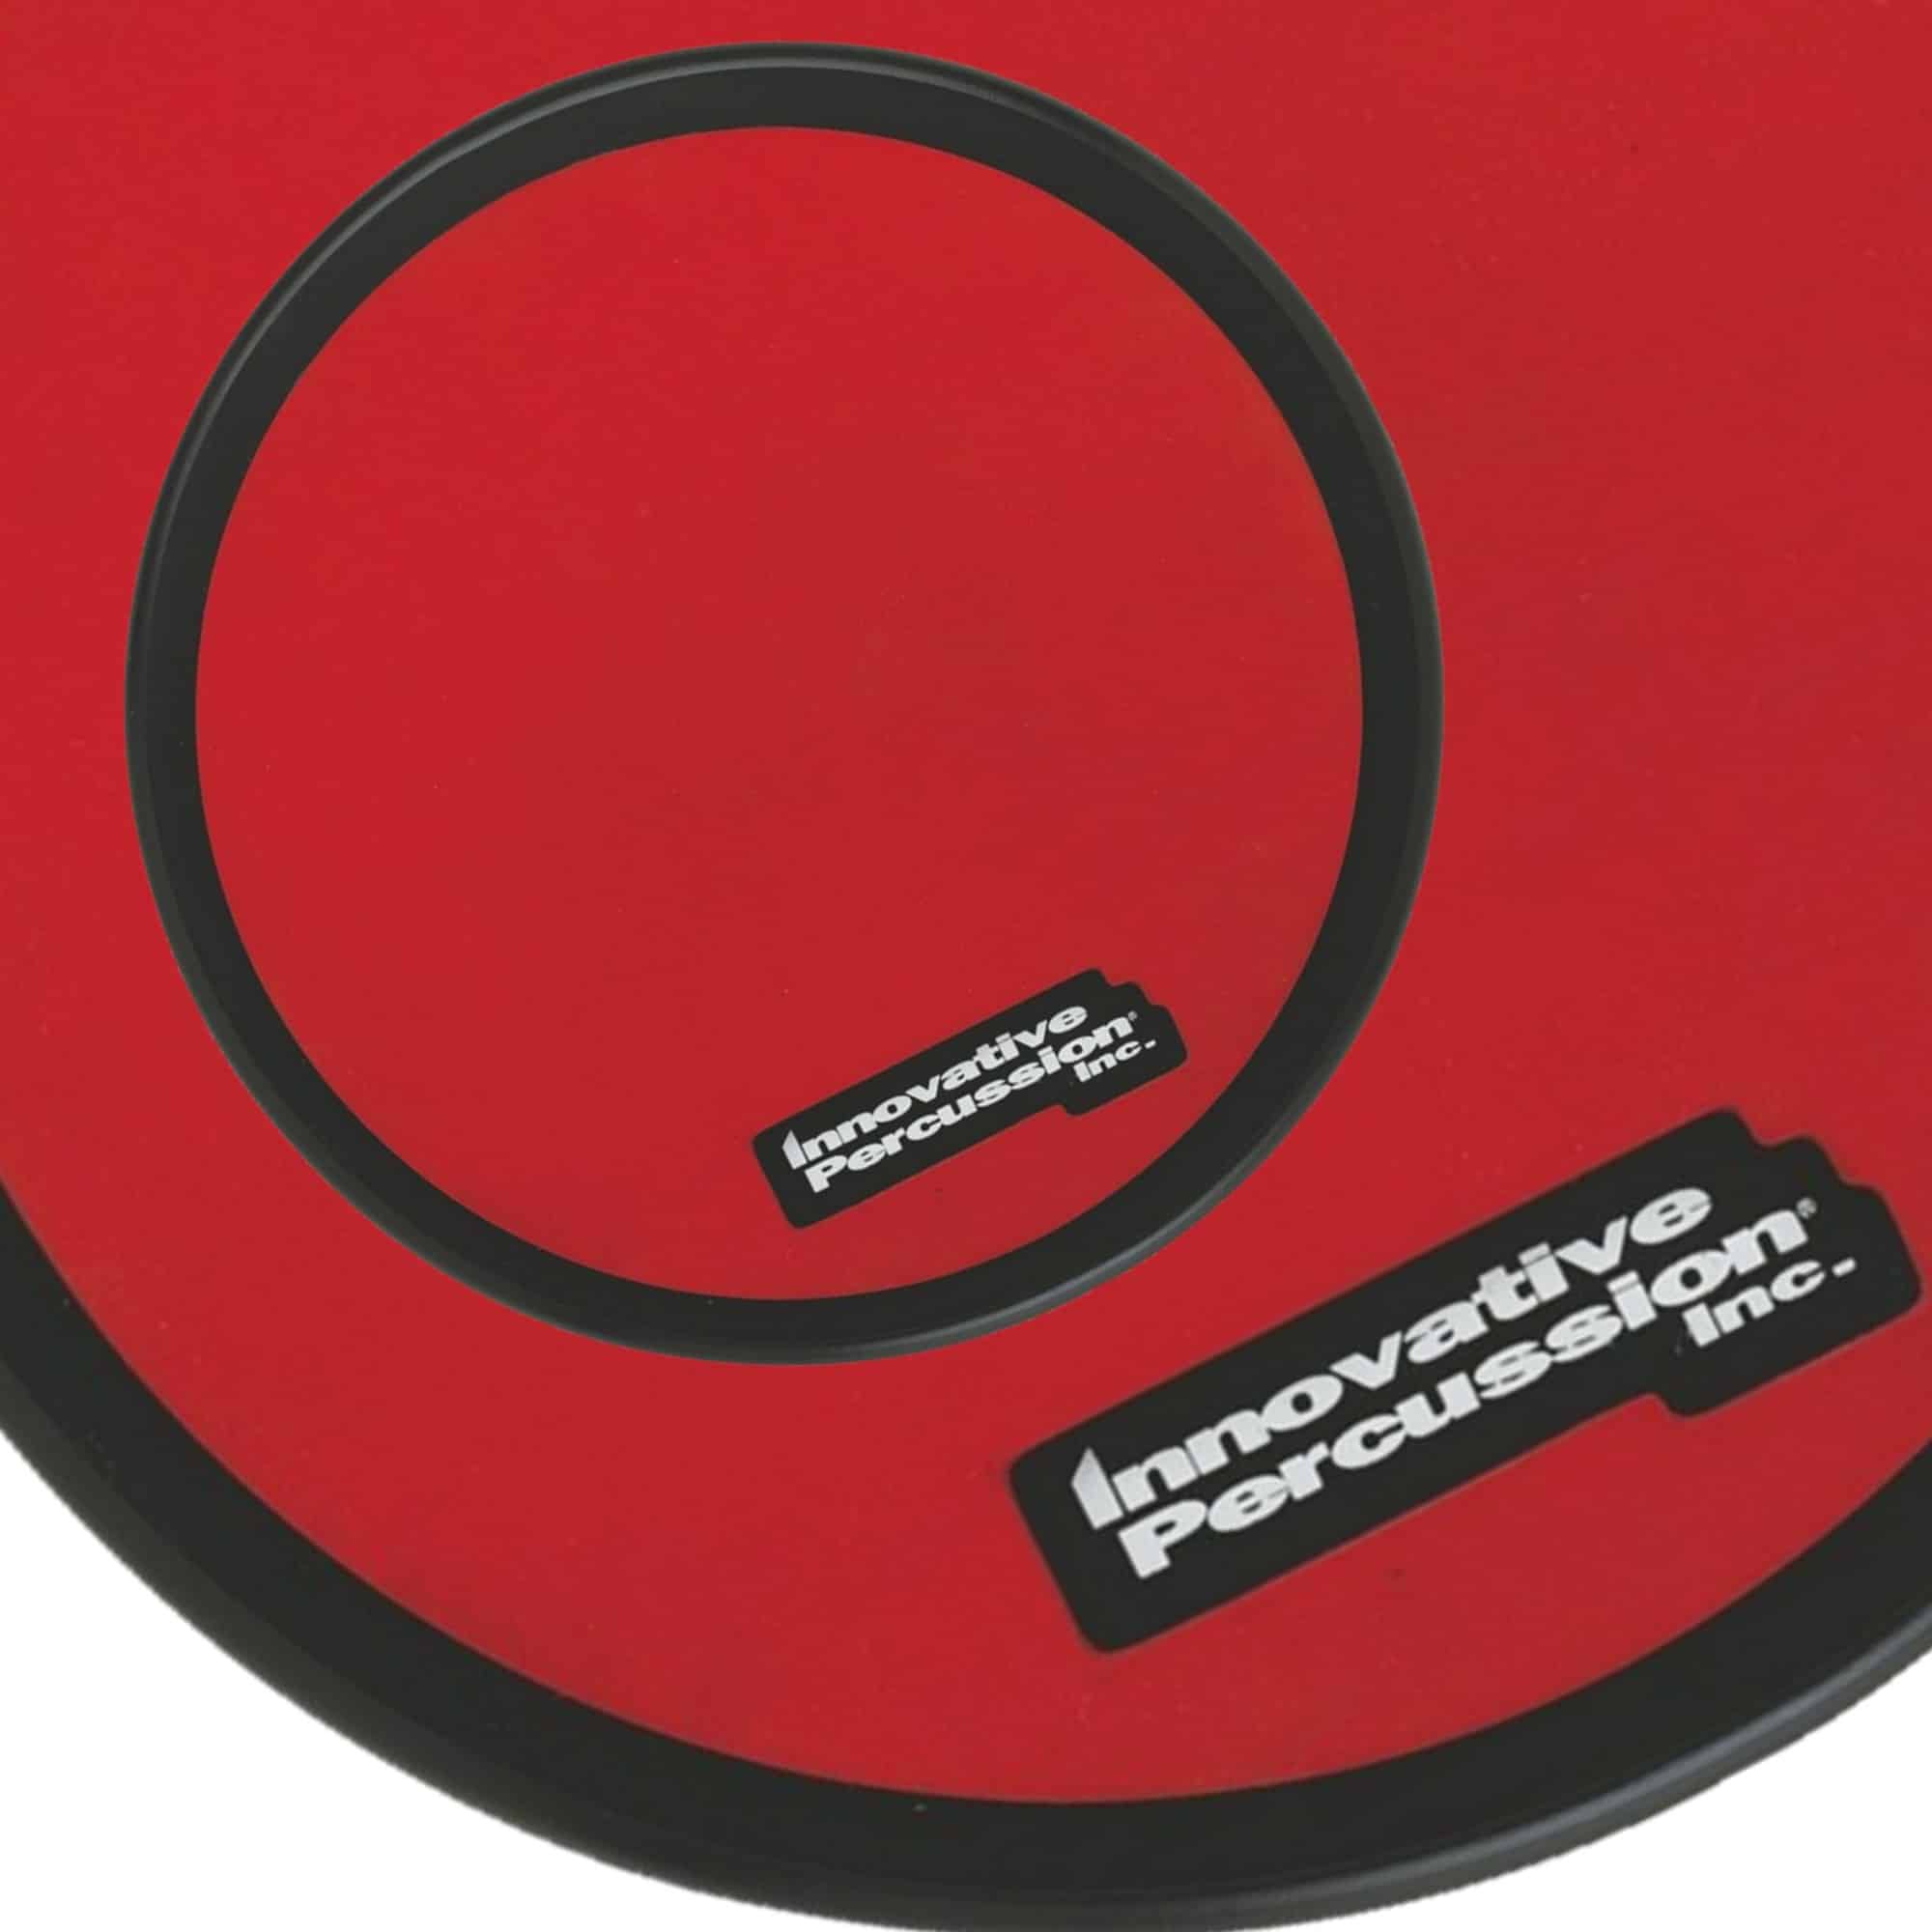 Innovative Percussion Red Gum Rubber Pad with Rim